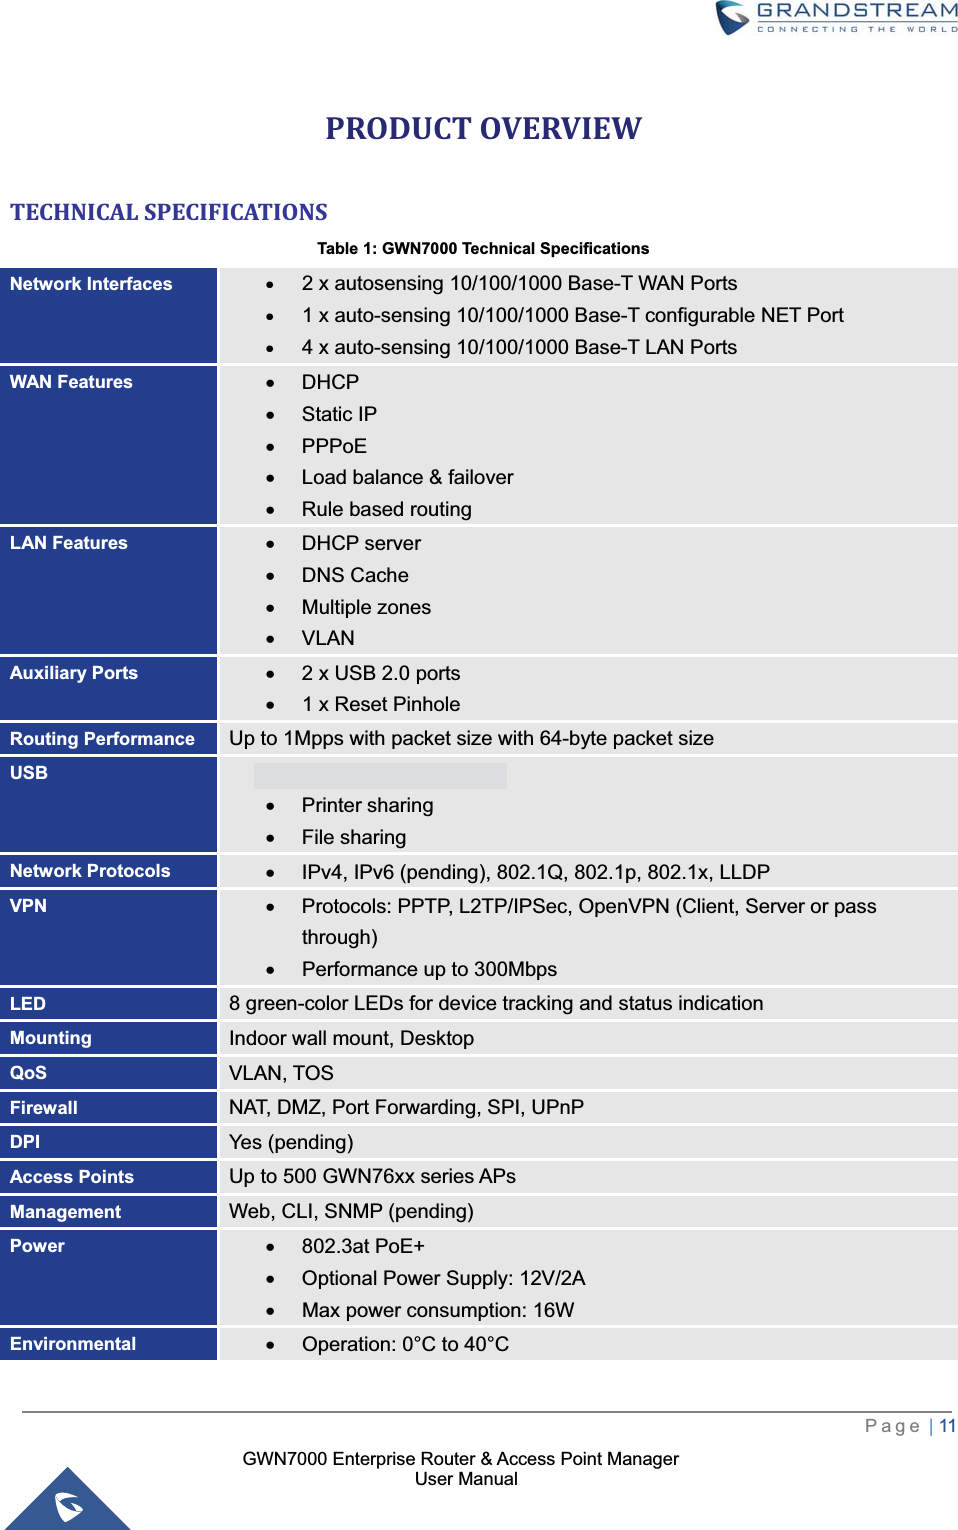 GWN7000 Enterprise Router &amp; Access Point ManagerUser ManualPRODUCT OVERVIEW TECHNICAL SPECIFICATIONS Table 1: GWN7000 Technical SpecificationsNetwork Interfaces x2 x autosensing 10/100/1000 Base-T WAN Portsx1 x auto-sensing 10/100/1000 Base-T configurable NET Port x4 x auto-sensing 10/100/1000 Base-T LAN PortsWAN Features xDHCPxStatic IP xPPPoE xLoad balance &amp; failover xRule based routingLAN Features xDHCP server xDNS Cache xMultiple zones xVLANAuxiliary Ports x2 x USB 2.0 portsx1 x Reset PinholeRouting Performance Up to 1Mpps with packet size with 64-byte packet sizeUSB x3G/4G/LTE as WAN xPrinter sharing xFile sharingNetwork Protocols xIPv4, IPv6 (pending), 802.1Q, 802.1p, 802.1x, LLDPVPN xProtocols: PPTP, L2TP/IPSec, OpenVPN (Client, Server or pass through)xPerformance up to 300MbpsLED 8 green-color LEDs for device tracking and status indicationMounting Indoor wall mount, DesktopQoS VLAN, TOSFirewall NAT, DMZ, Port Forwarding, SPI, UPnPDPI Yes (pending)Access Points Up to 500 GWN76xx series APsManagement Web, CLI, SNMP (pending)Power x802.3at PoE+ xOptional Power Supply: 12V/2AxMax power consumption: 16WEnvironmental xOperation: 0°C to 40°CPage |11